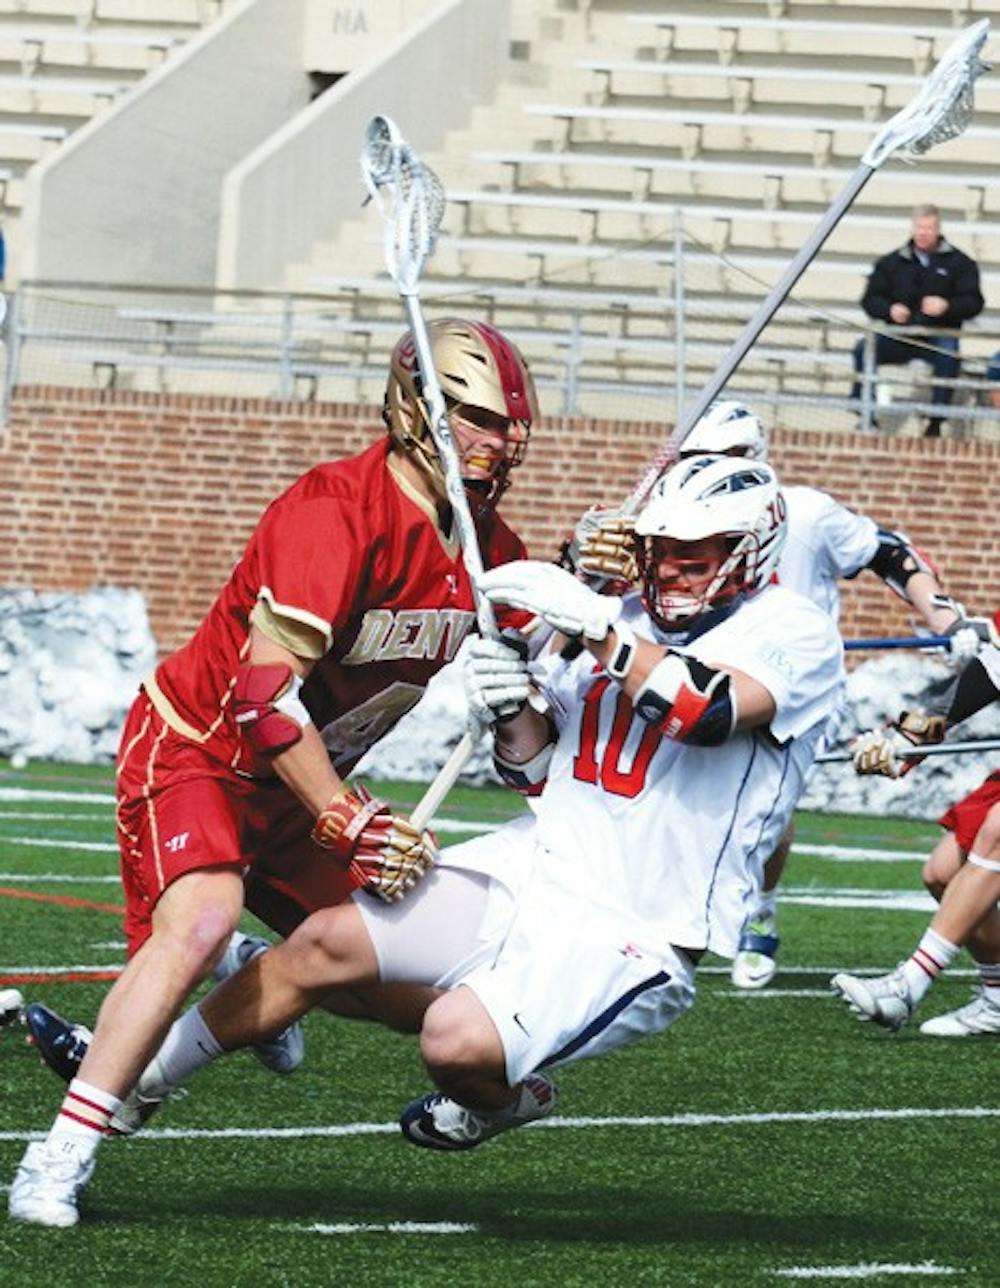 2014 graduate Drew Bellinsky finished his collegiate lacrosse career playing with 128 of the best players in the country after finishing third in points for the Quakers in 2014.